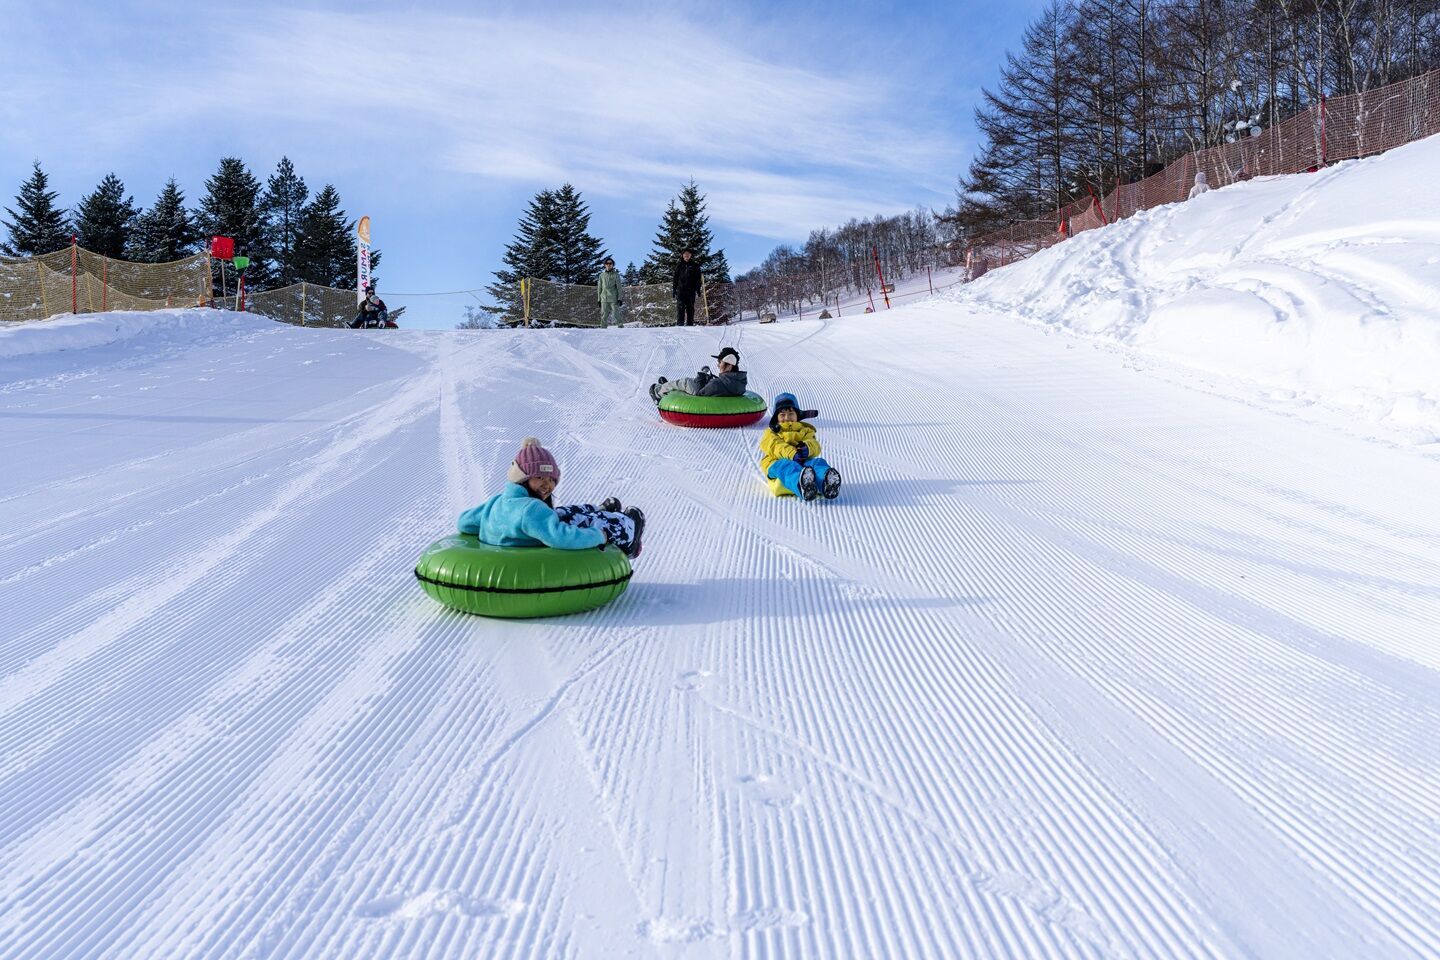 The best ski resorts in Japan for snowy winter holidays, even in spring